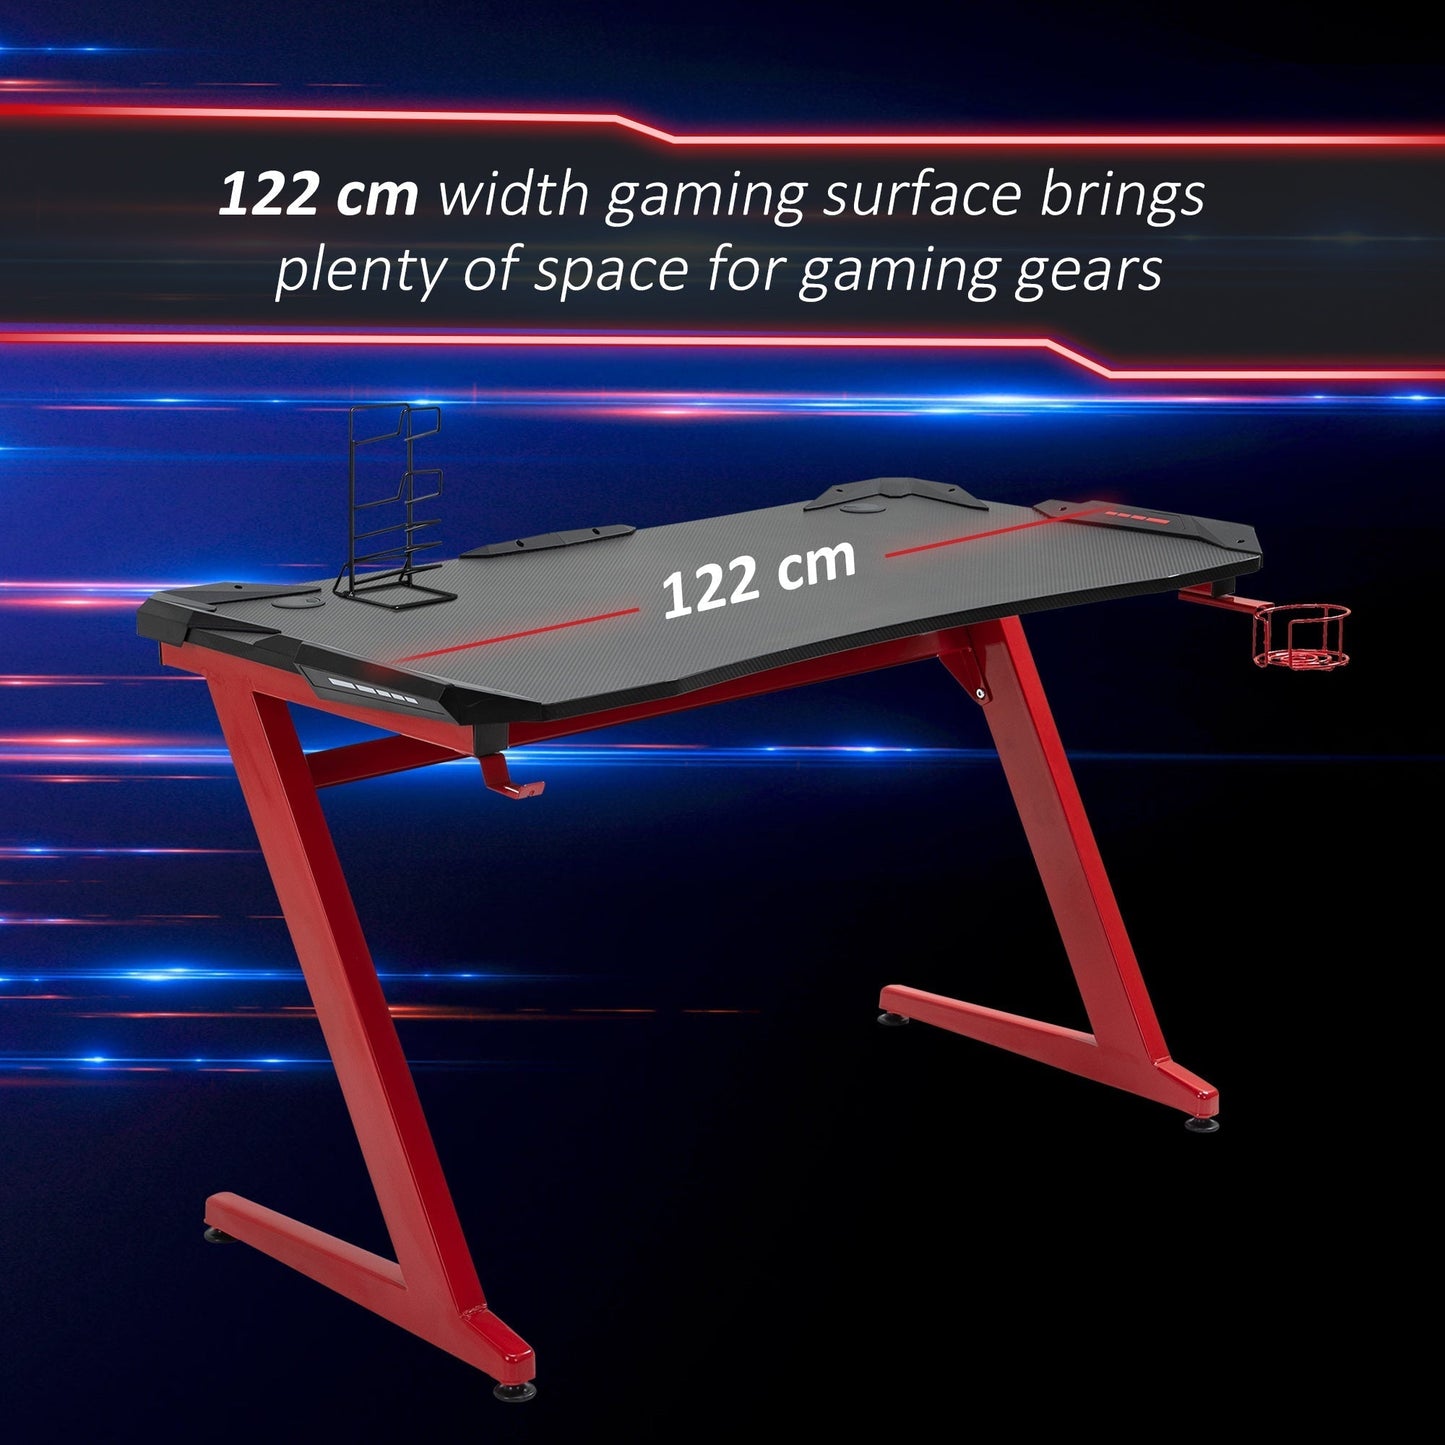 Maplin Plus Large Gaming Desk with Cup Holder, Headphone Hook & Cable Management - maplin.co.uk